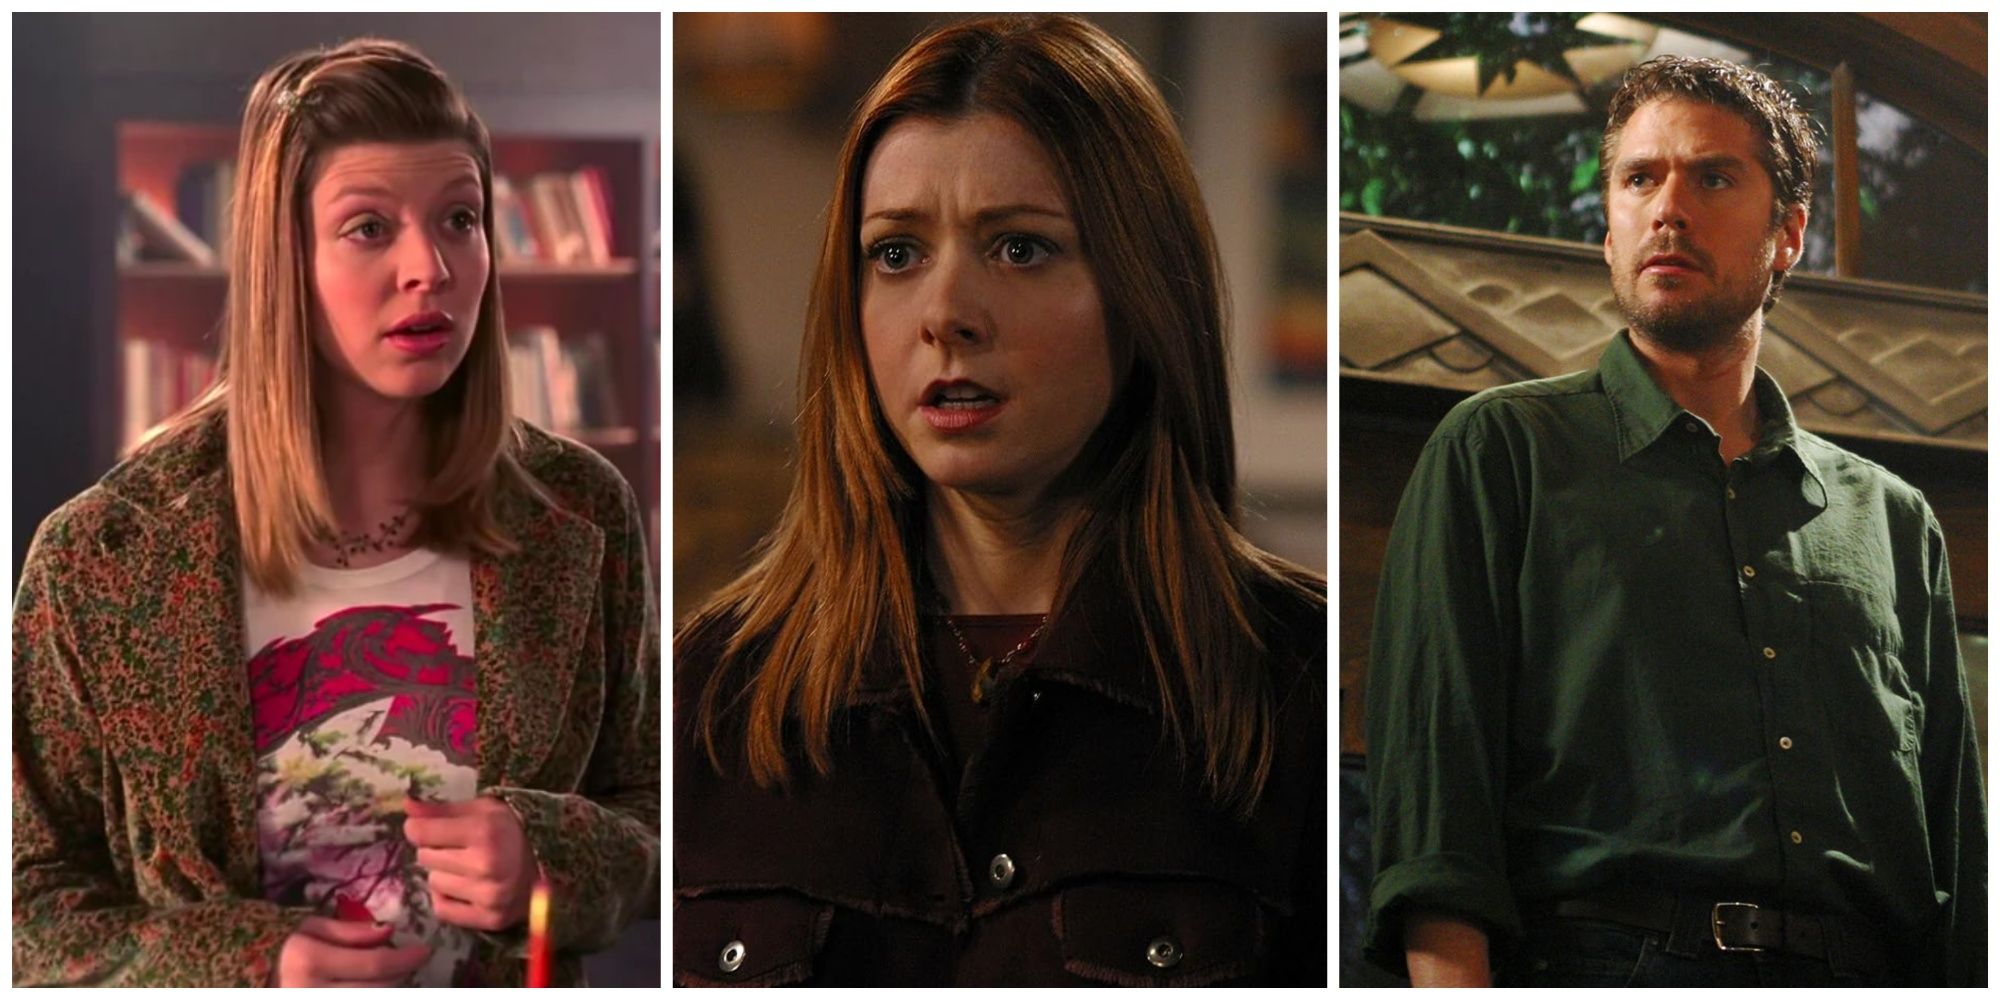 Split image showing Tara, Willow, and Wesley from Buffy the Vampire Slayer and Angel.